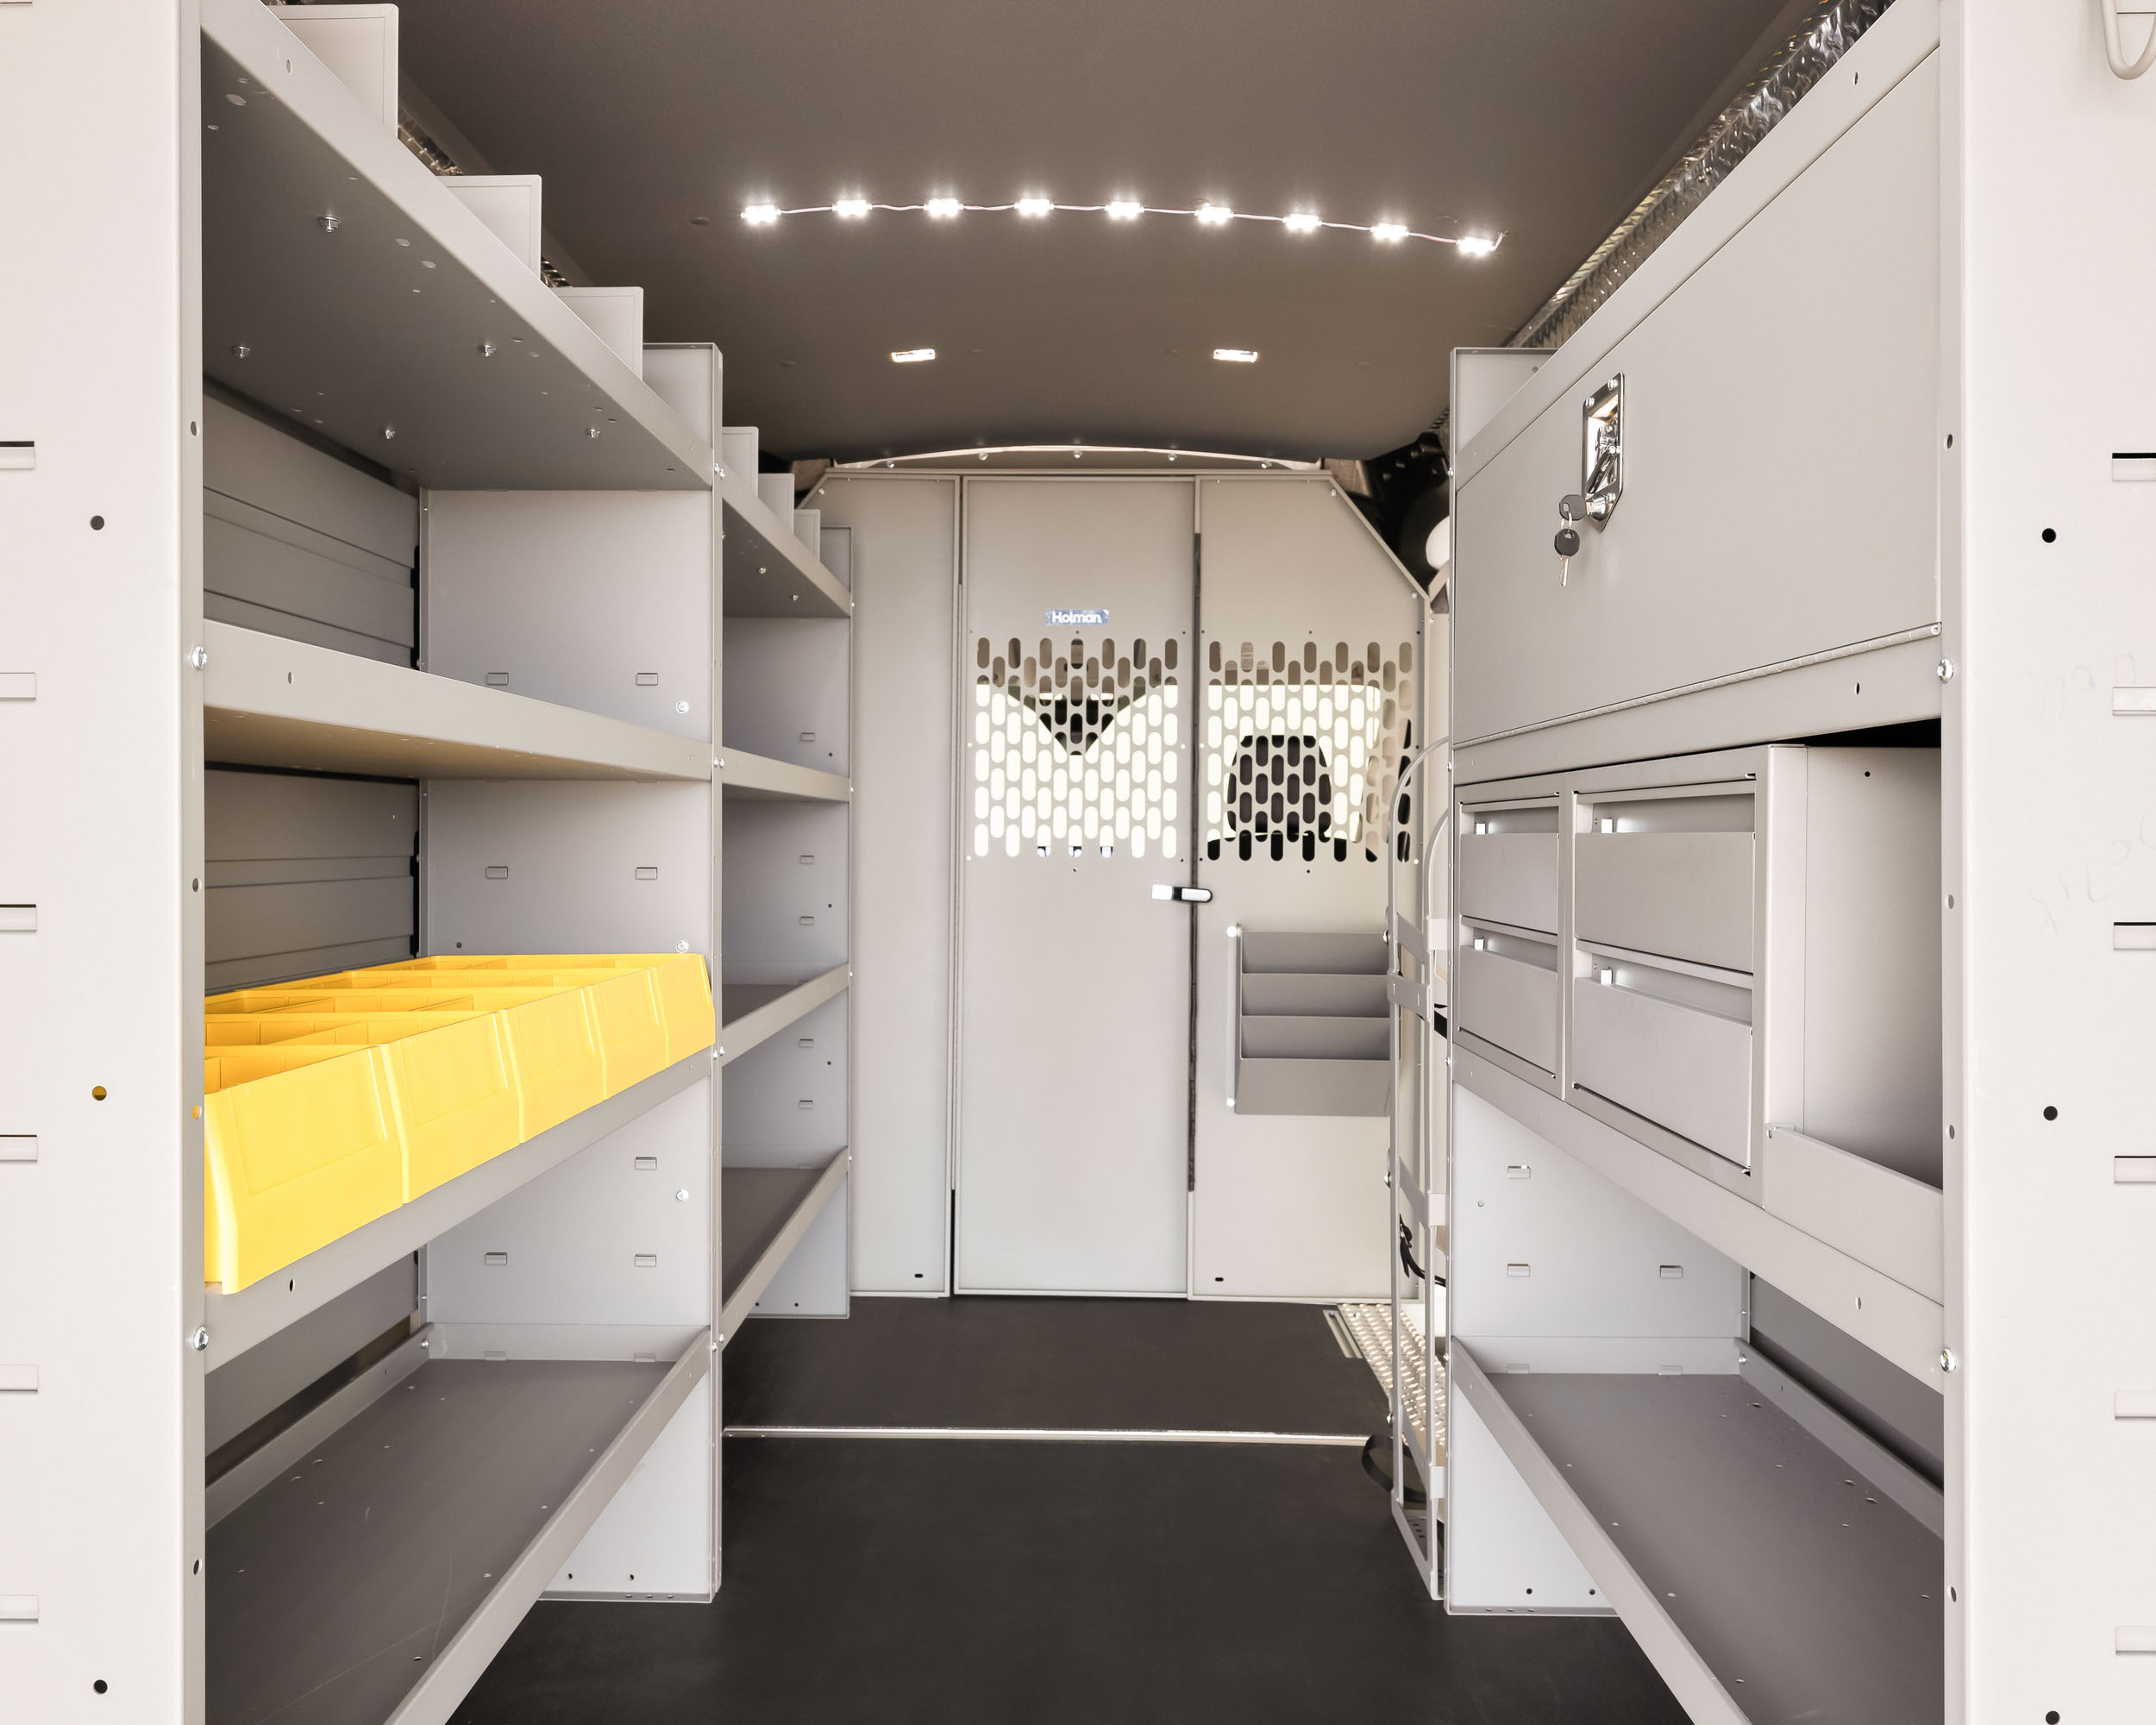 The interior of a van with shelves and drawers for HVAC contracters